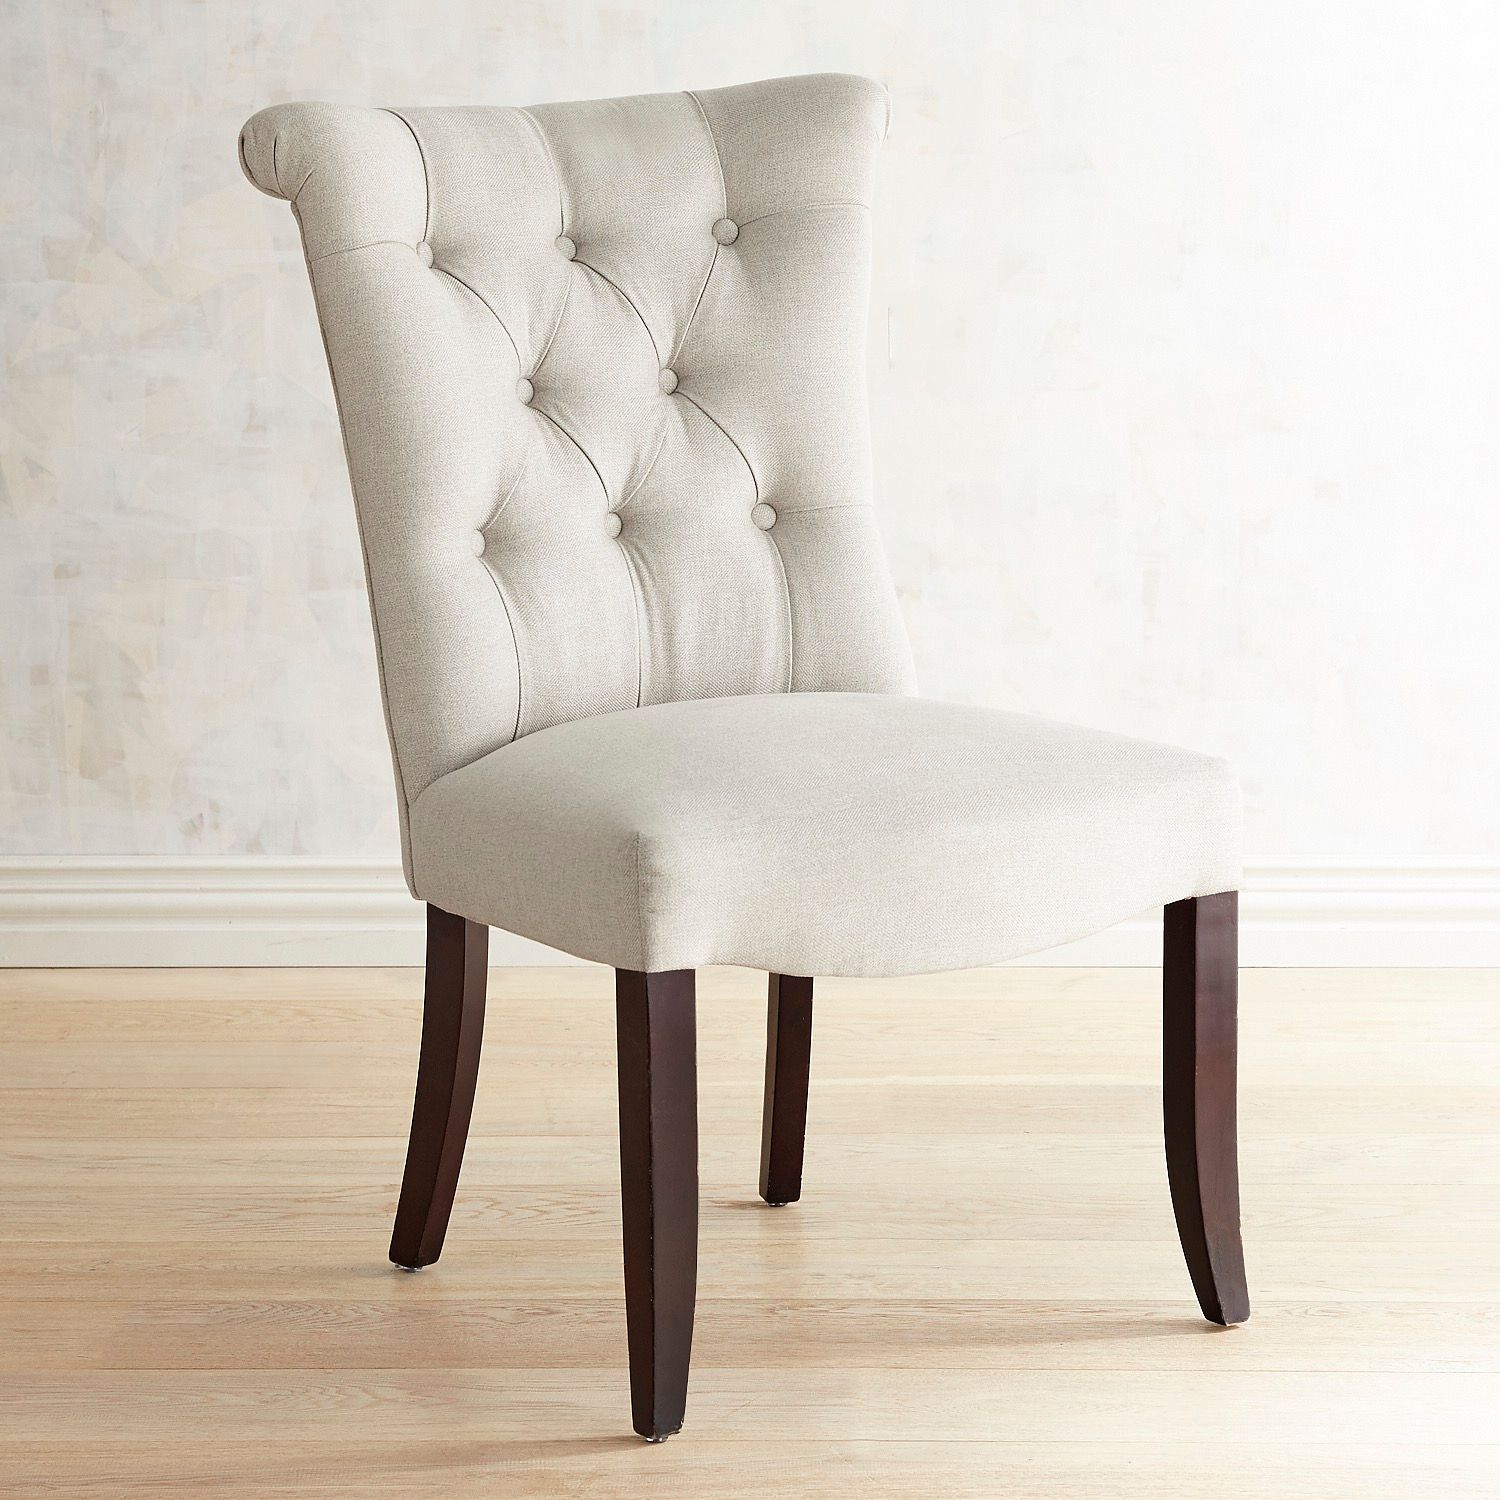 Colette Flax Dining Chair with Espresso Legs